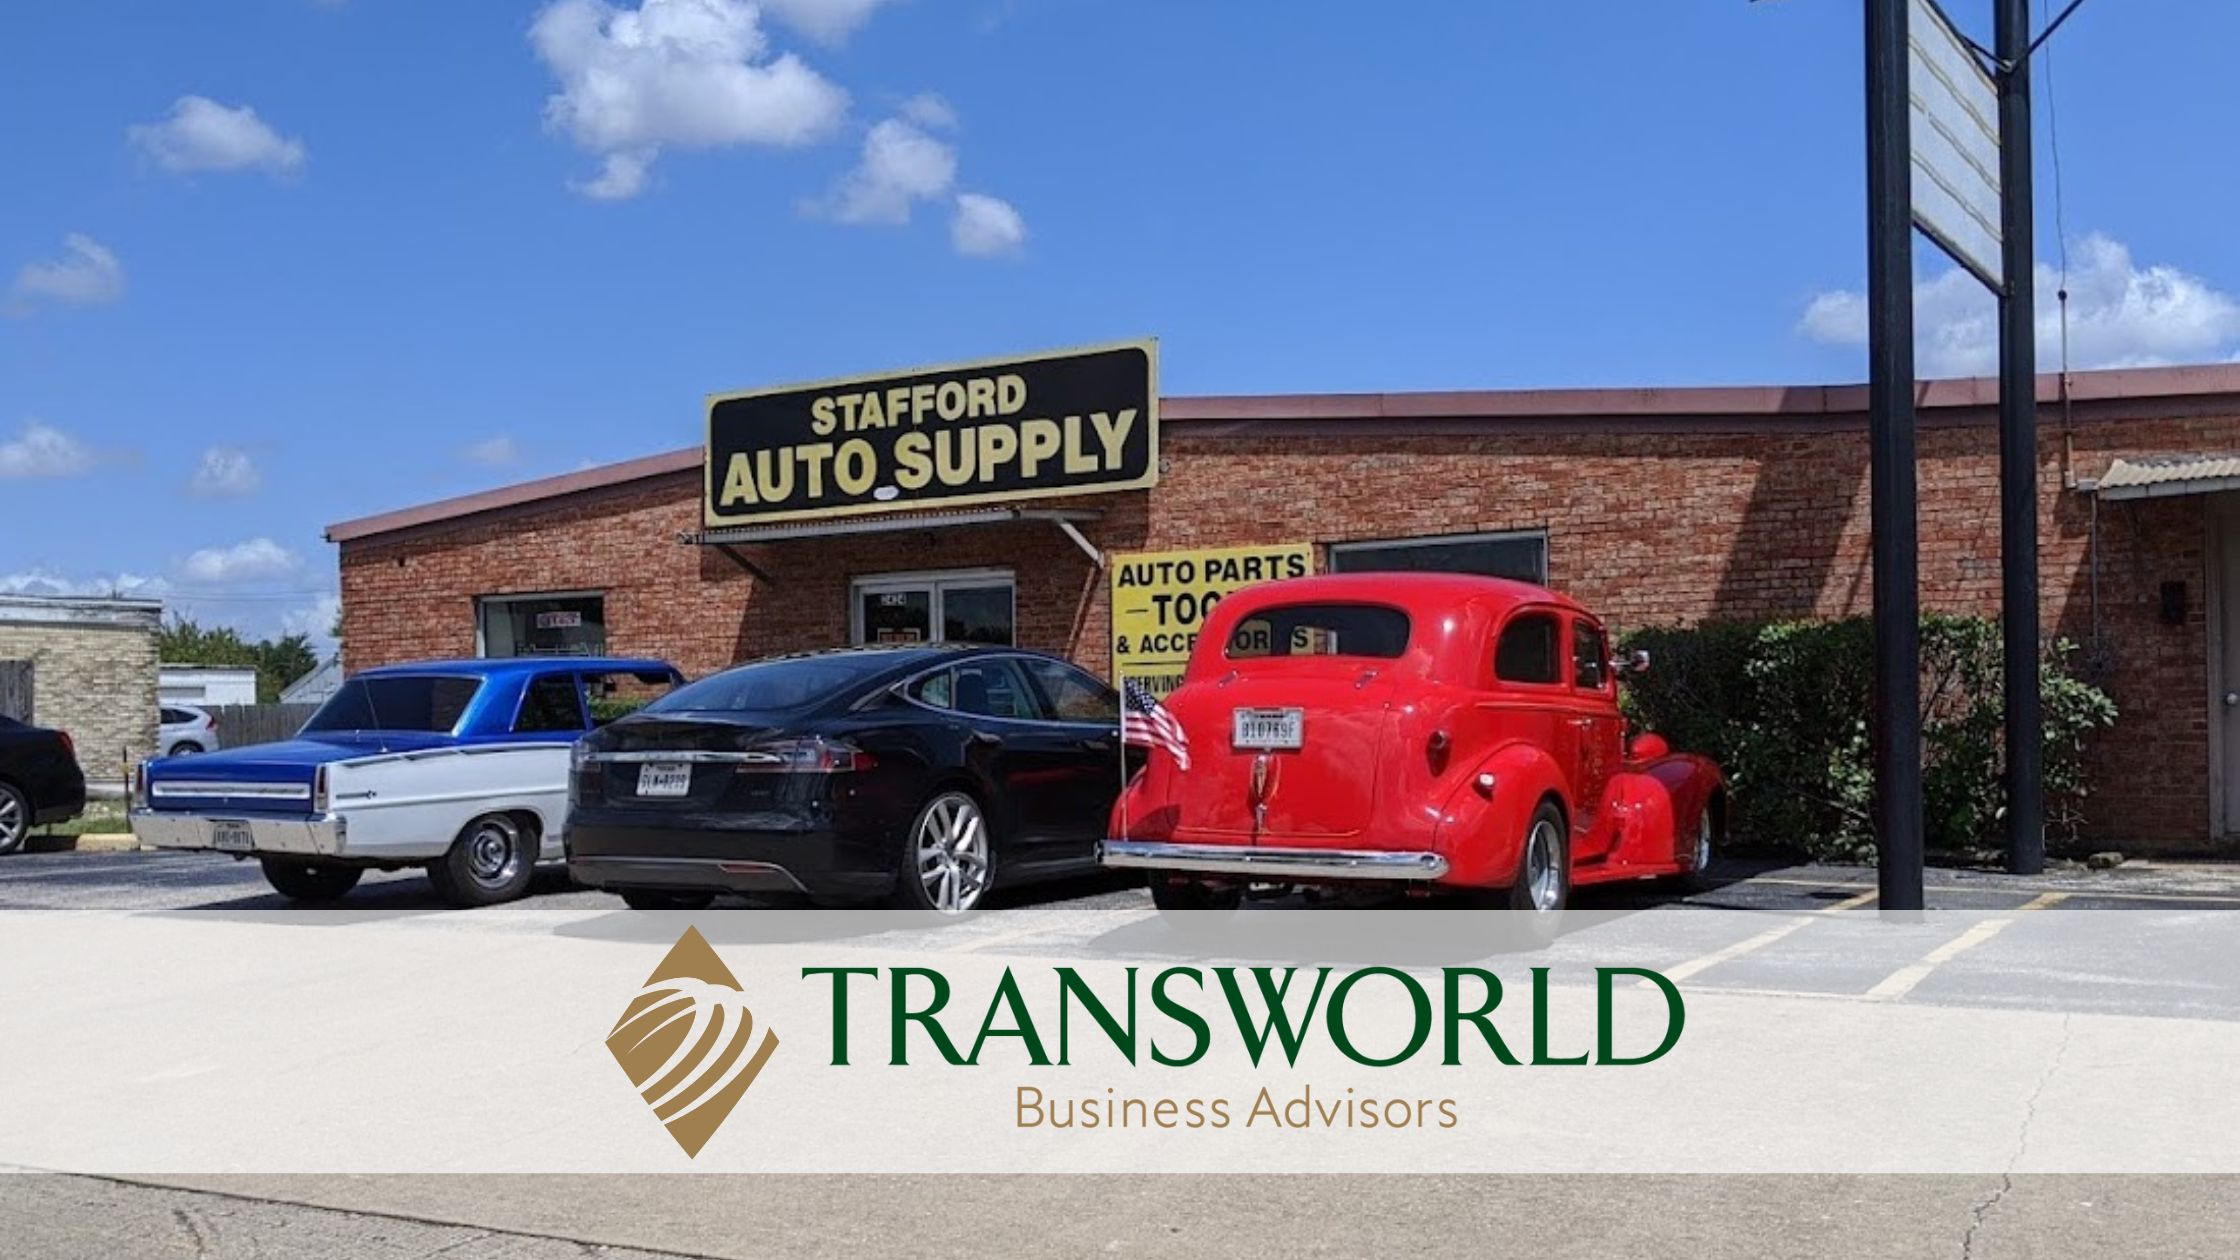 Auto Supply Store Inventory Offered at 1/3 Wholesale Value